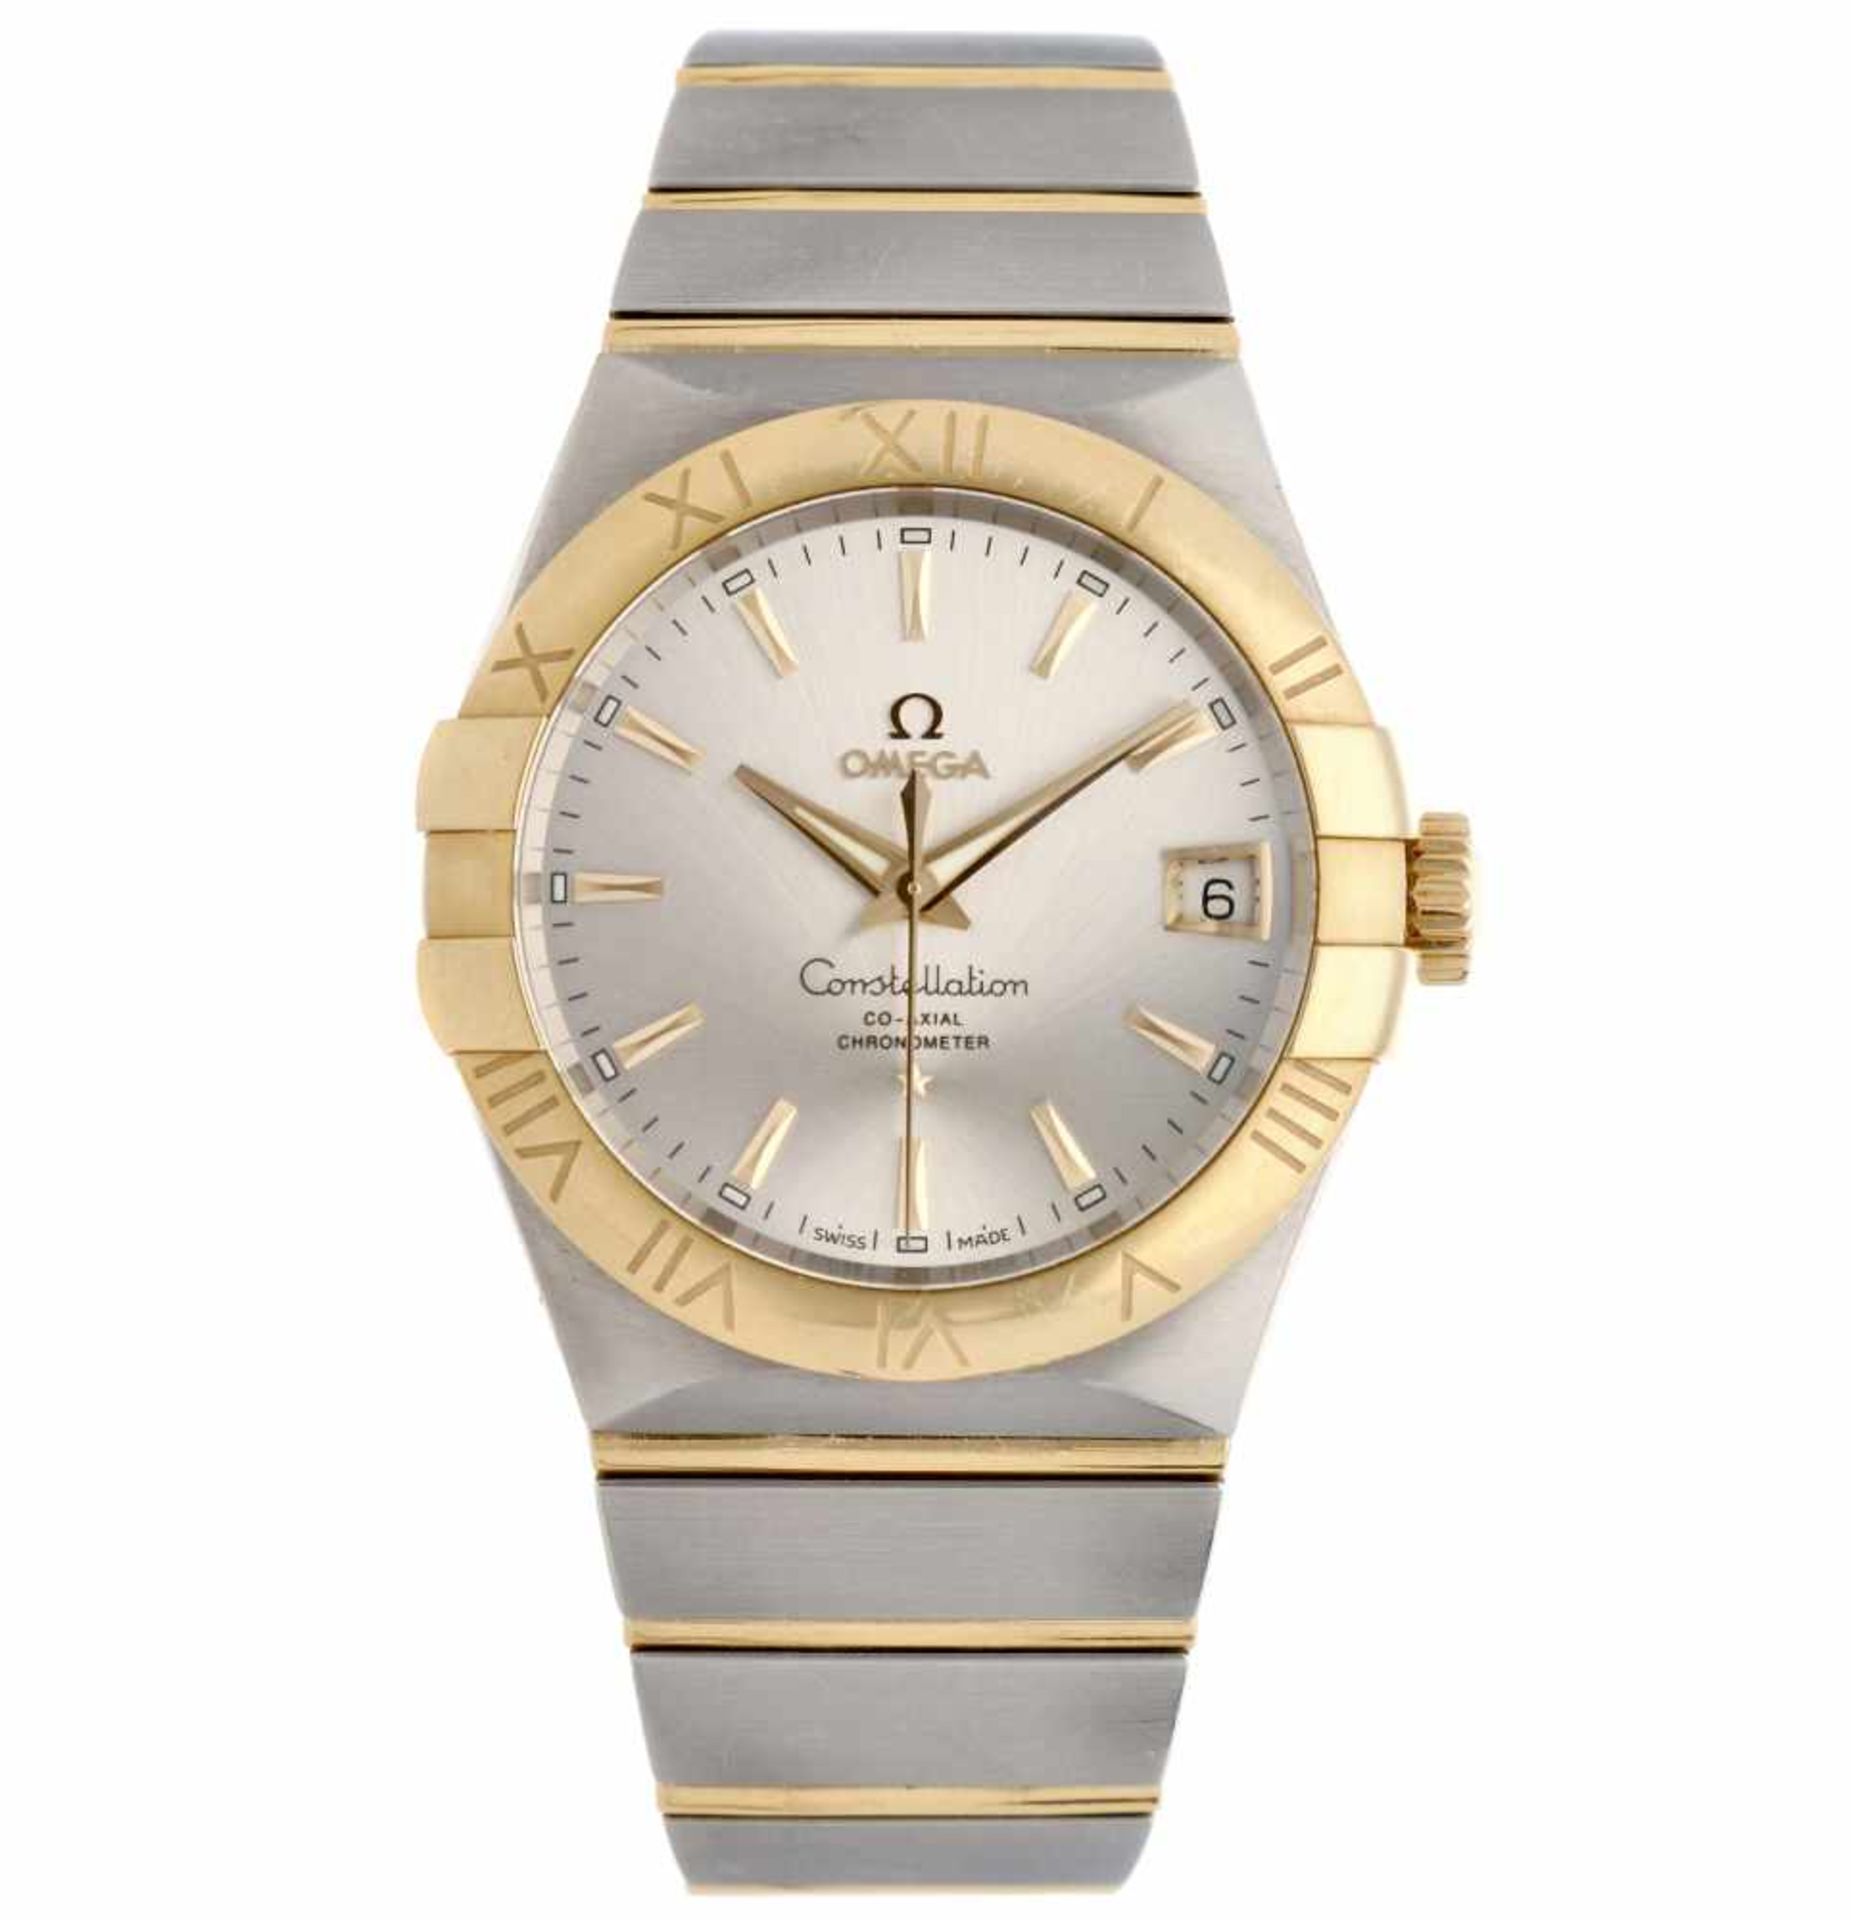 Omega Constellation Co-Axial - Men's watch - Automatic - Ca. 2011.